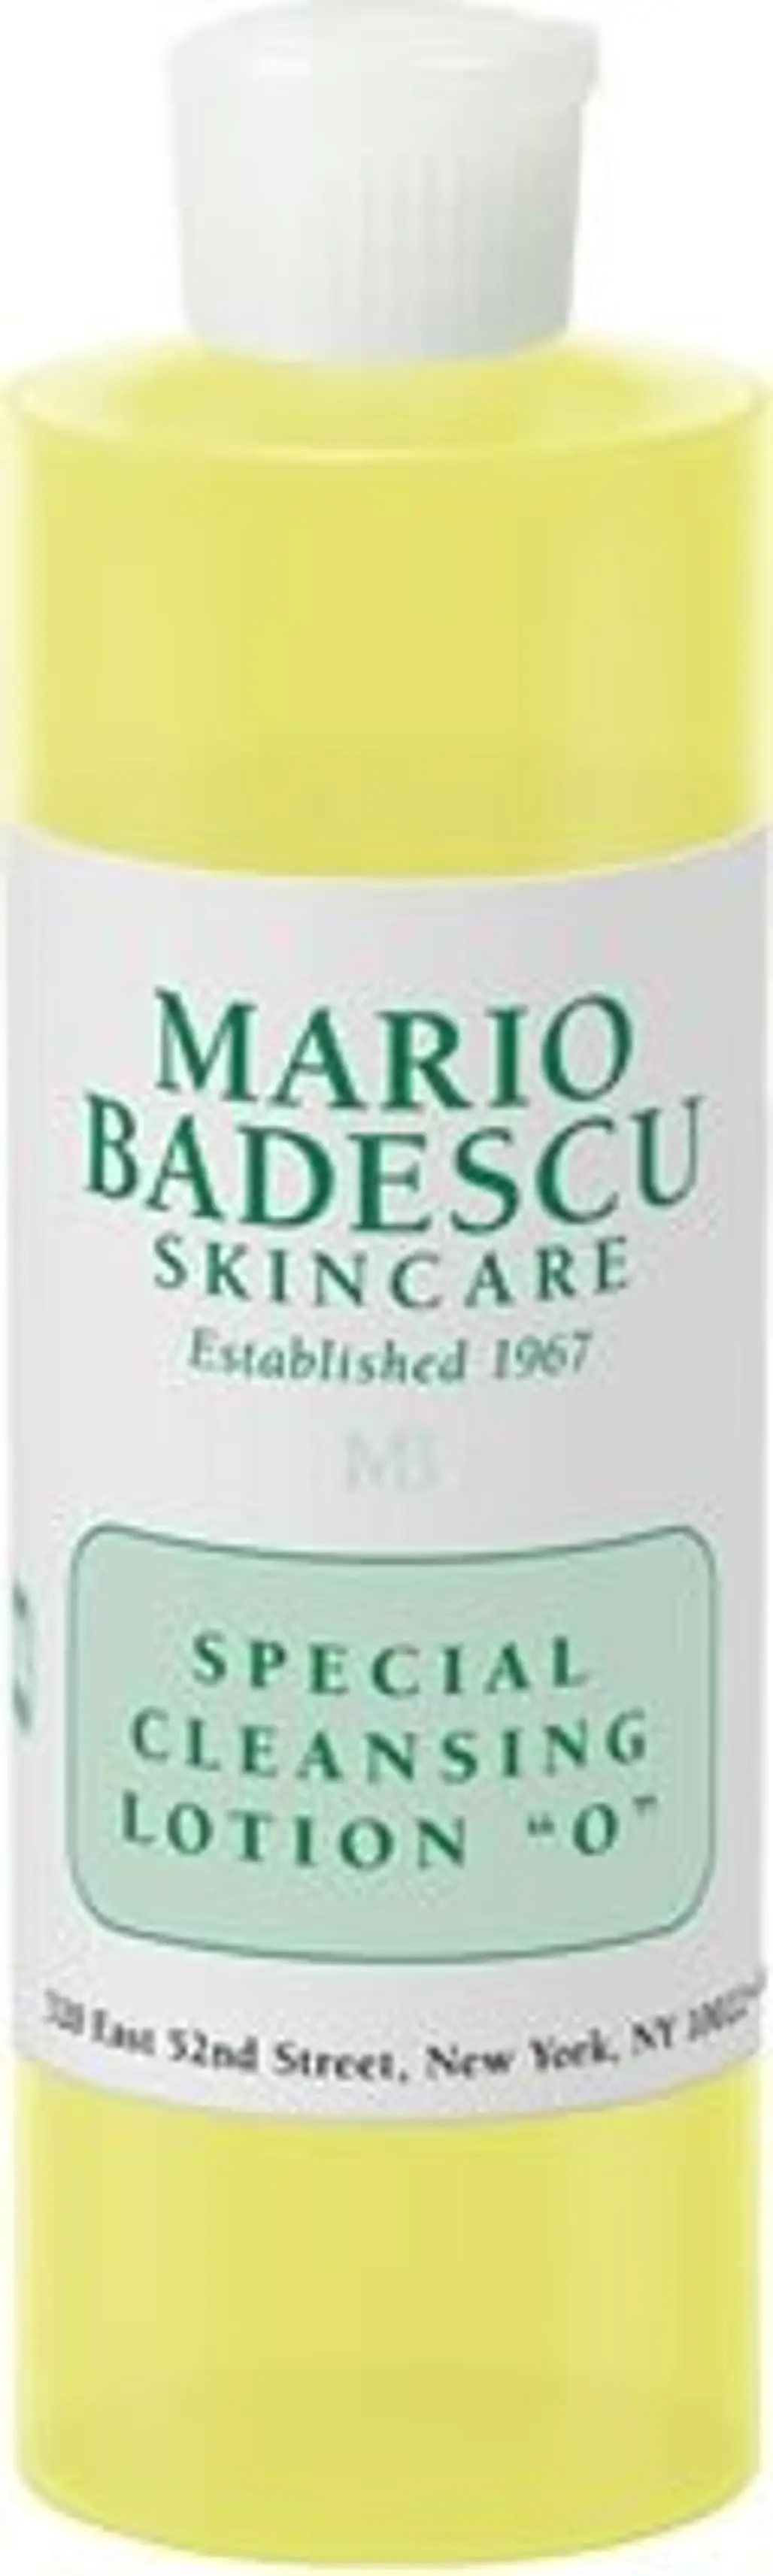 Mario Badescu Special Cleansing Lotion O (for Chest and Back Only)